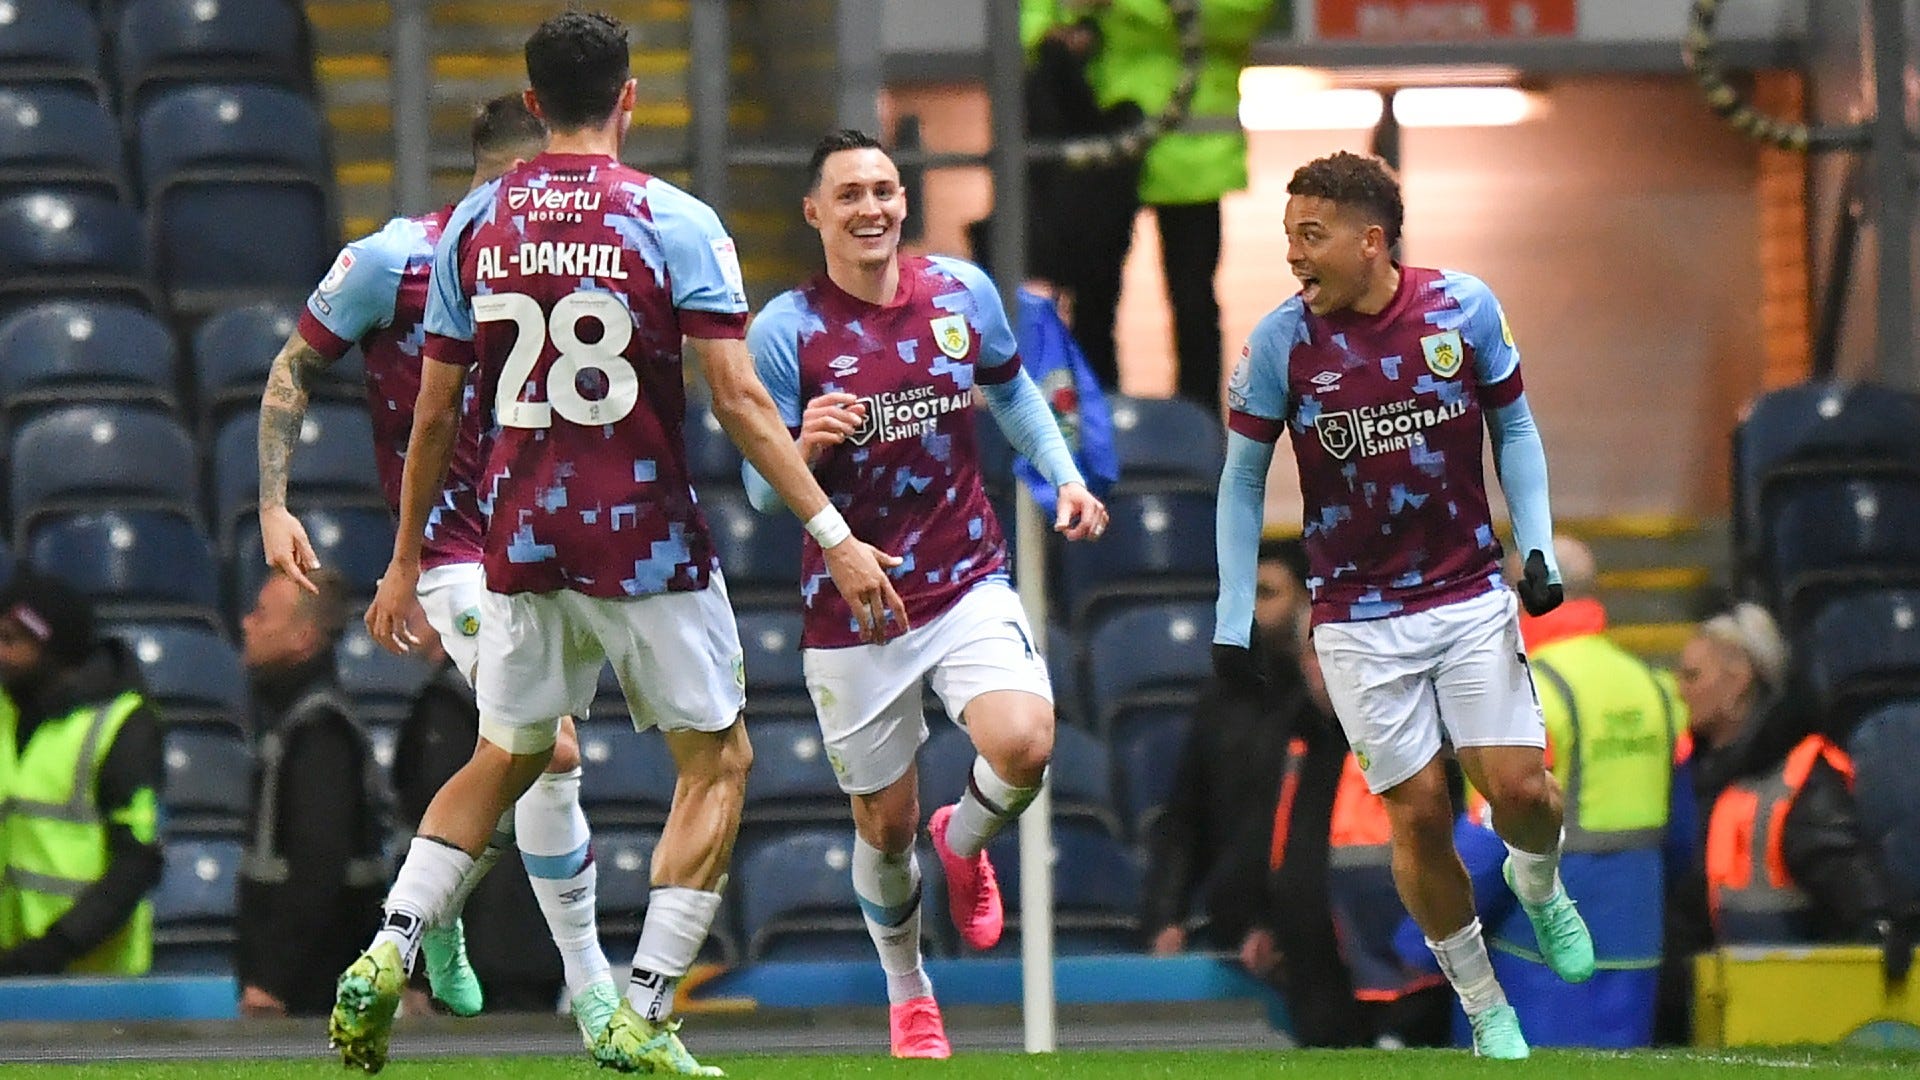 W88 Malaysia - W88 CELEBRATES BURNLEY FC's INAUGURAL VICTORY In a  triumphant display, Burnley secured their first victory of the season by  triumphing over Nottingham Forest in the EFL Cup. The sole